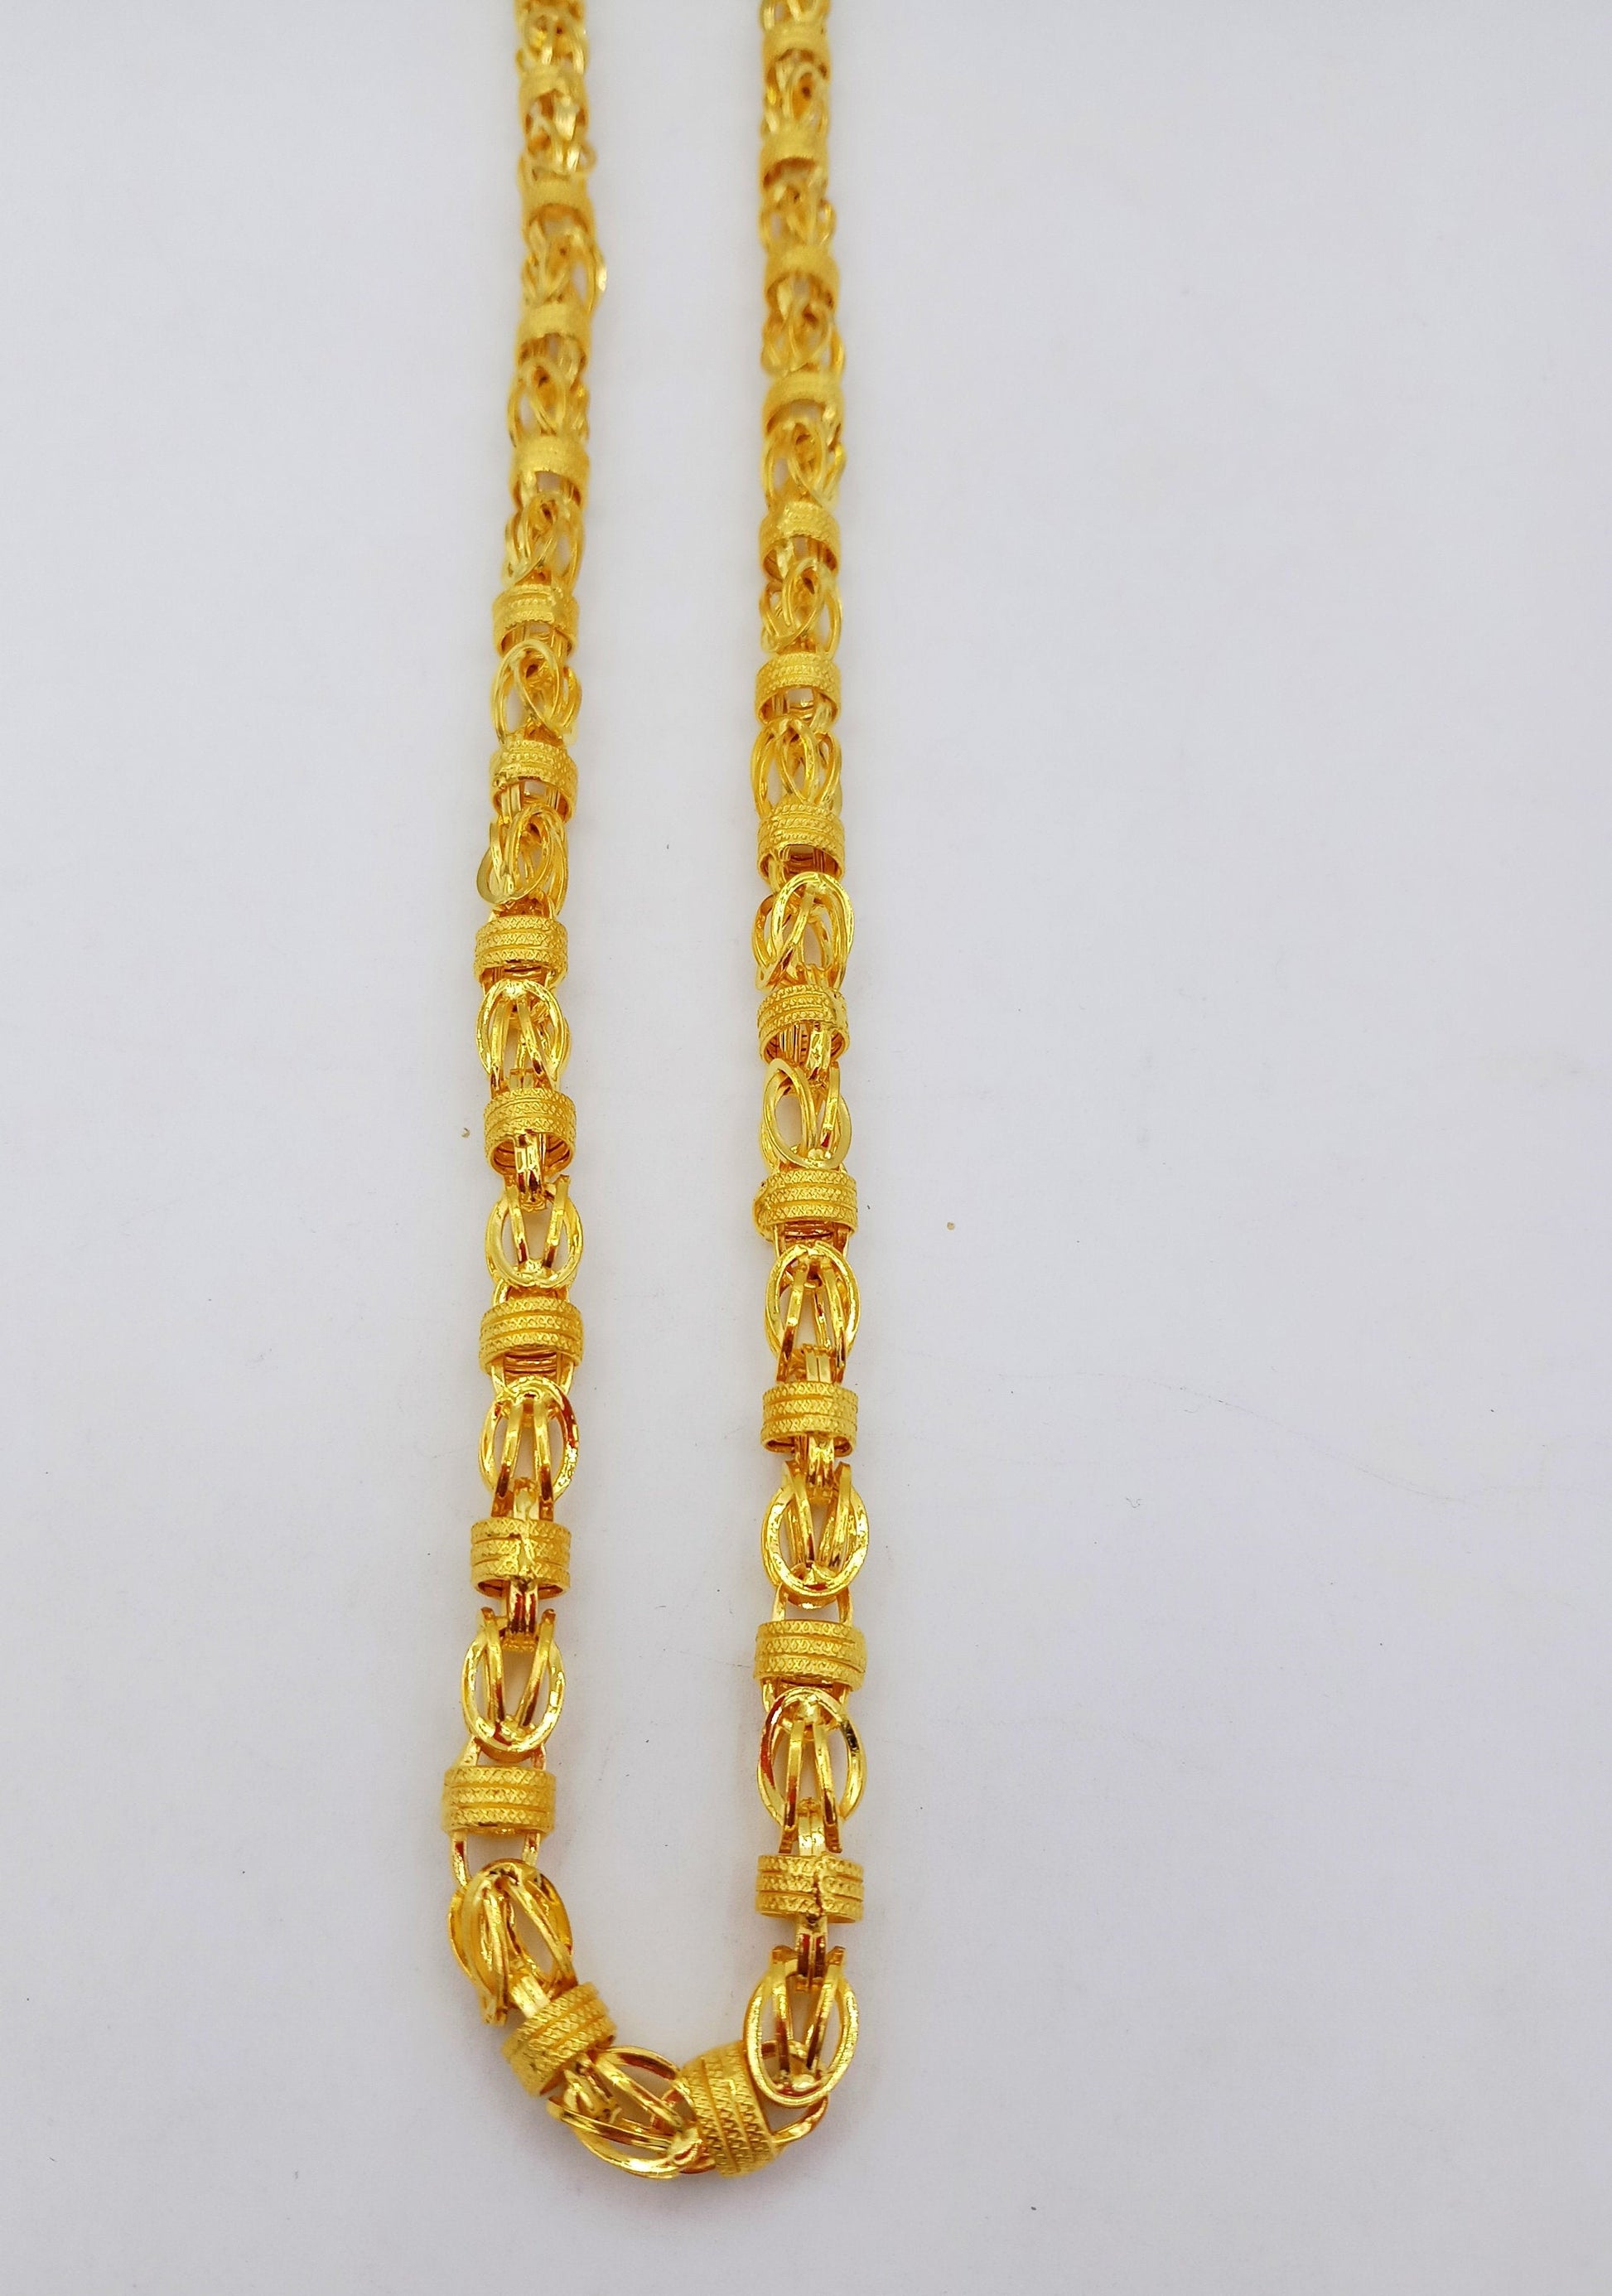 22kt yellow gold handmade fabulous 20 inches chain necklace genuine india jewelry for gifting - TRIBAL ORNAMENTS